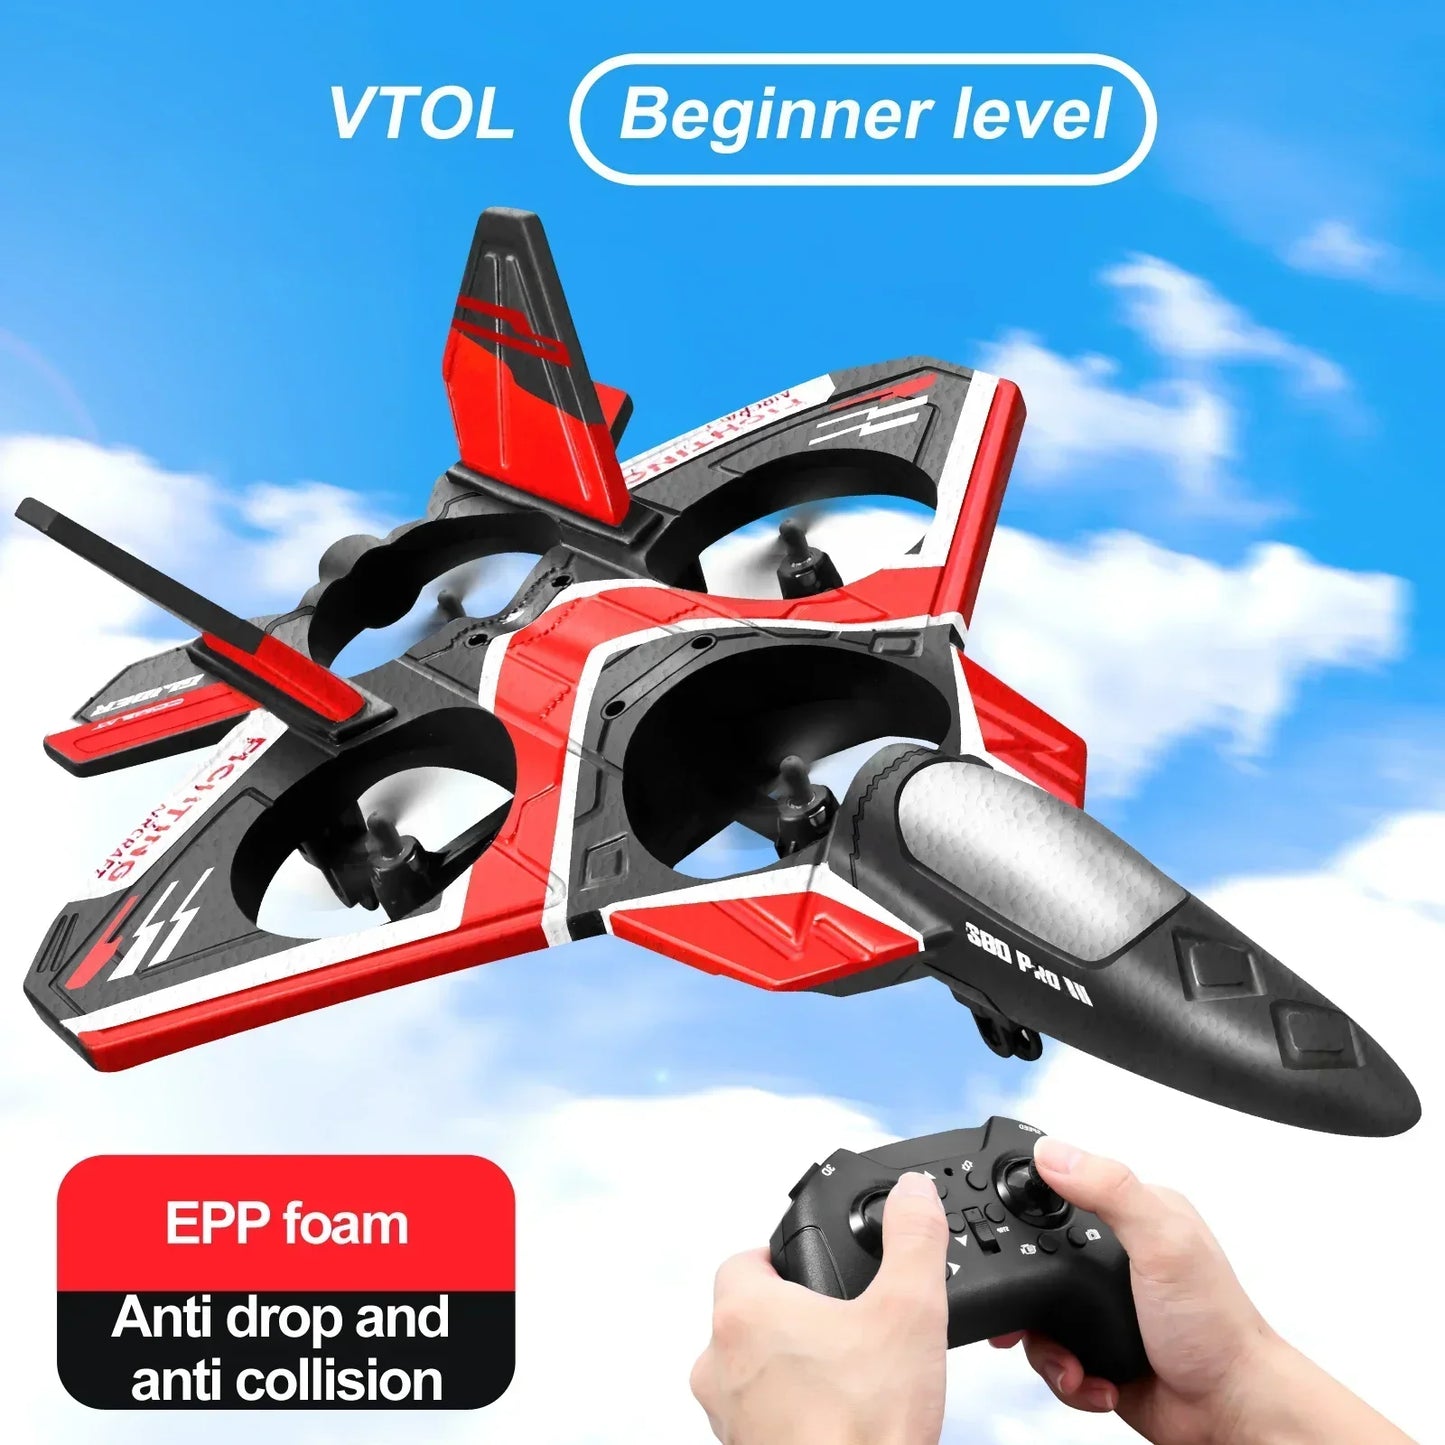 LED Light RC Foam Glider Fighter Airplane Toy for Boys